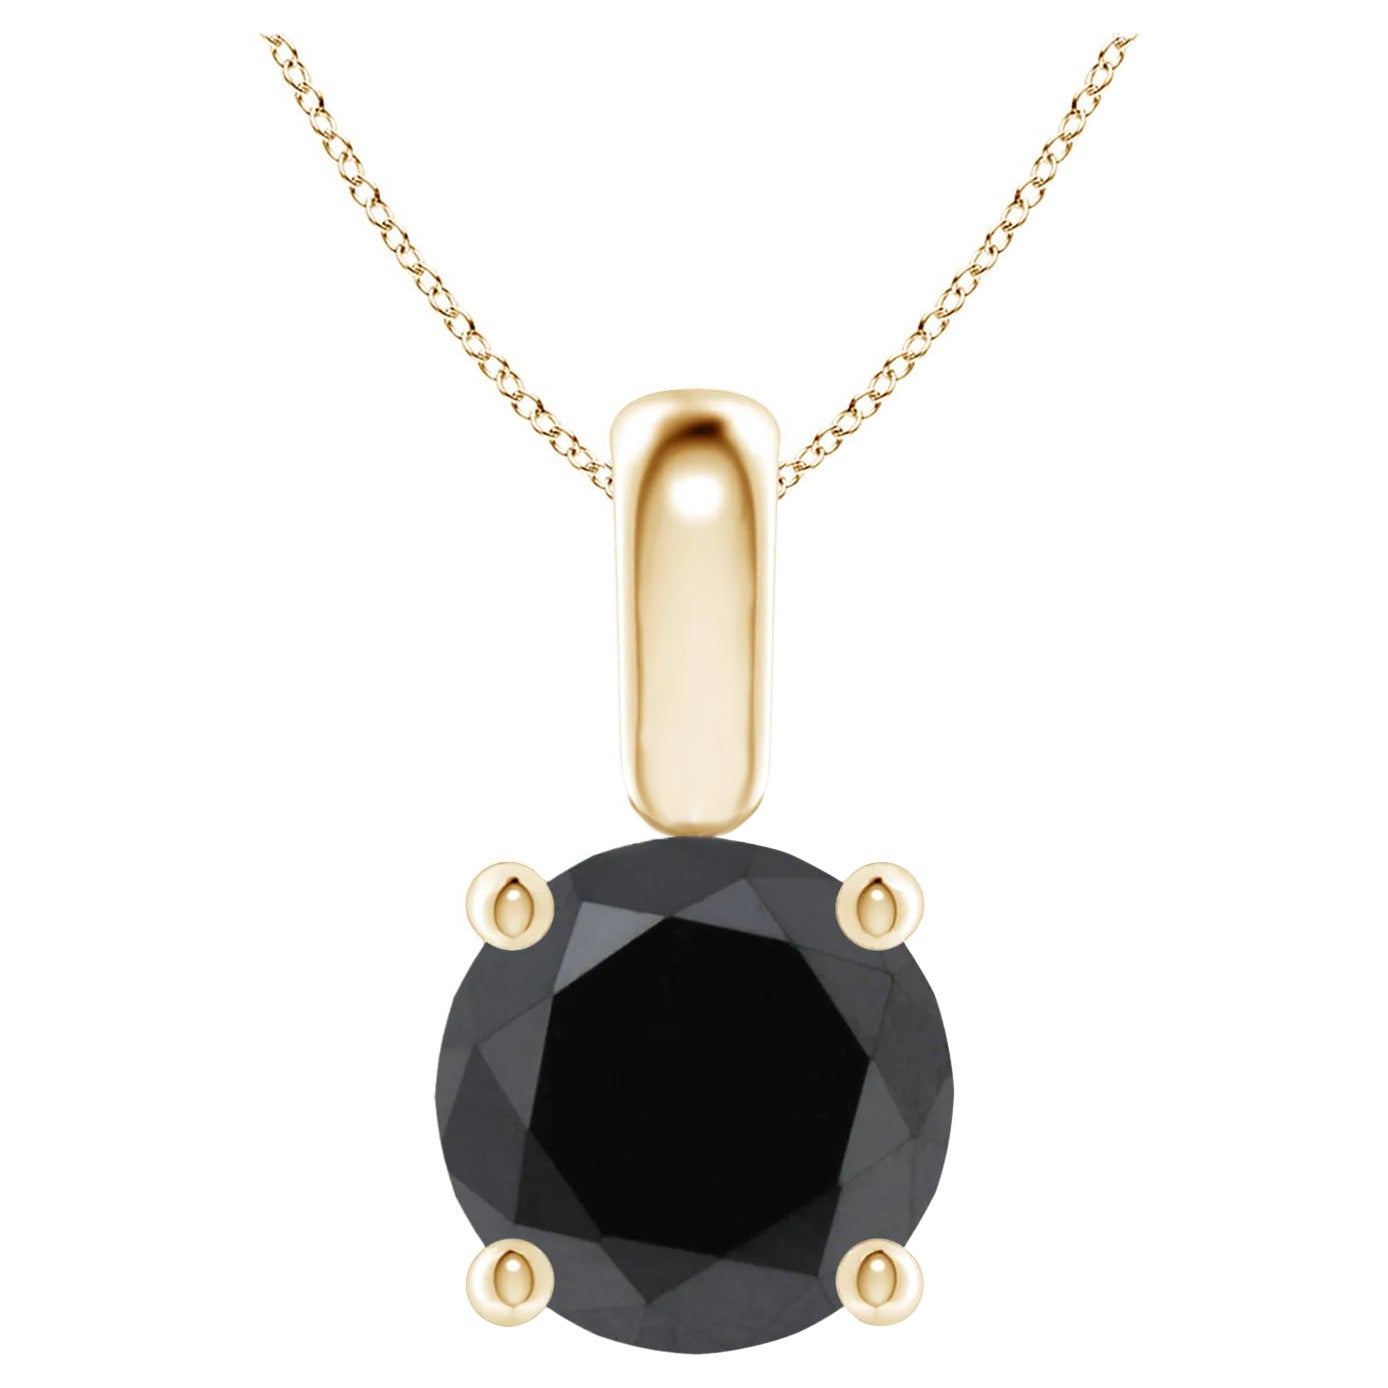 2.26 Carat Round Black Diamond Solitaire Pendant Necklace in 14K Yellow Gold